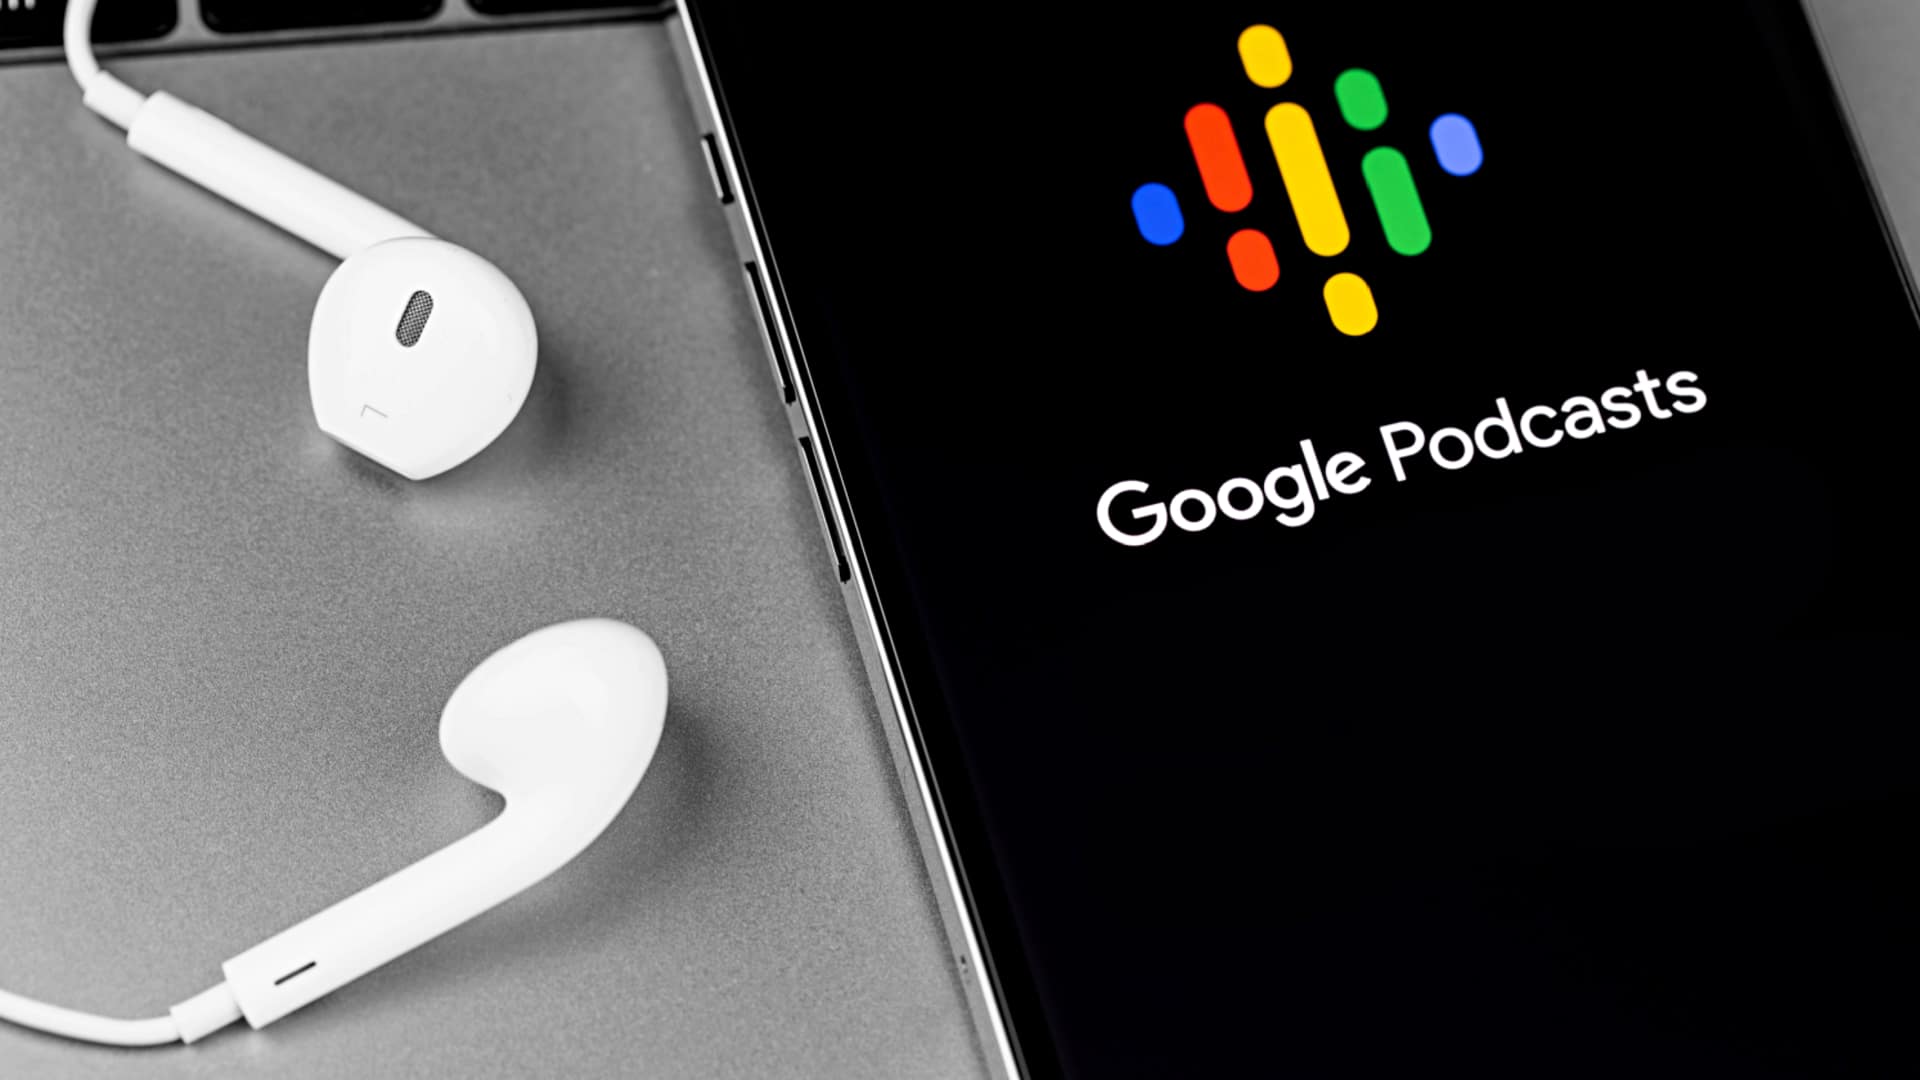 What made Google Podcasts better than YouTube Music